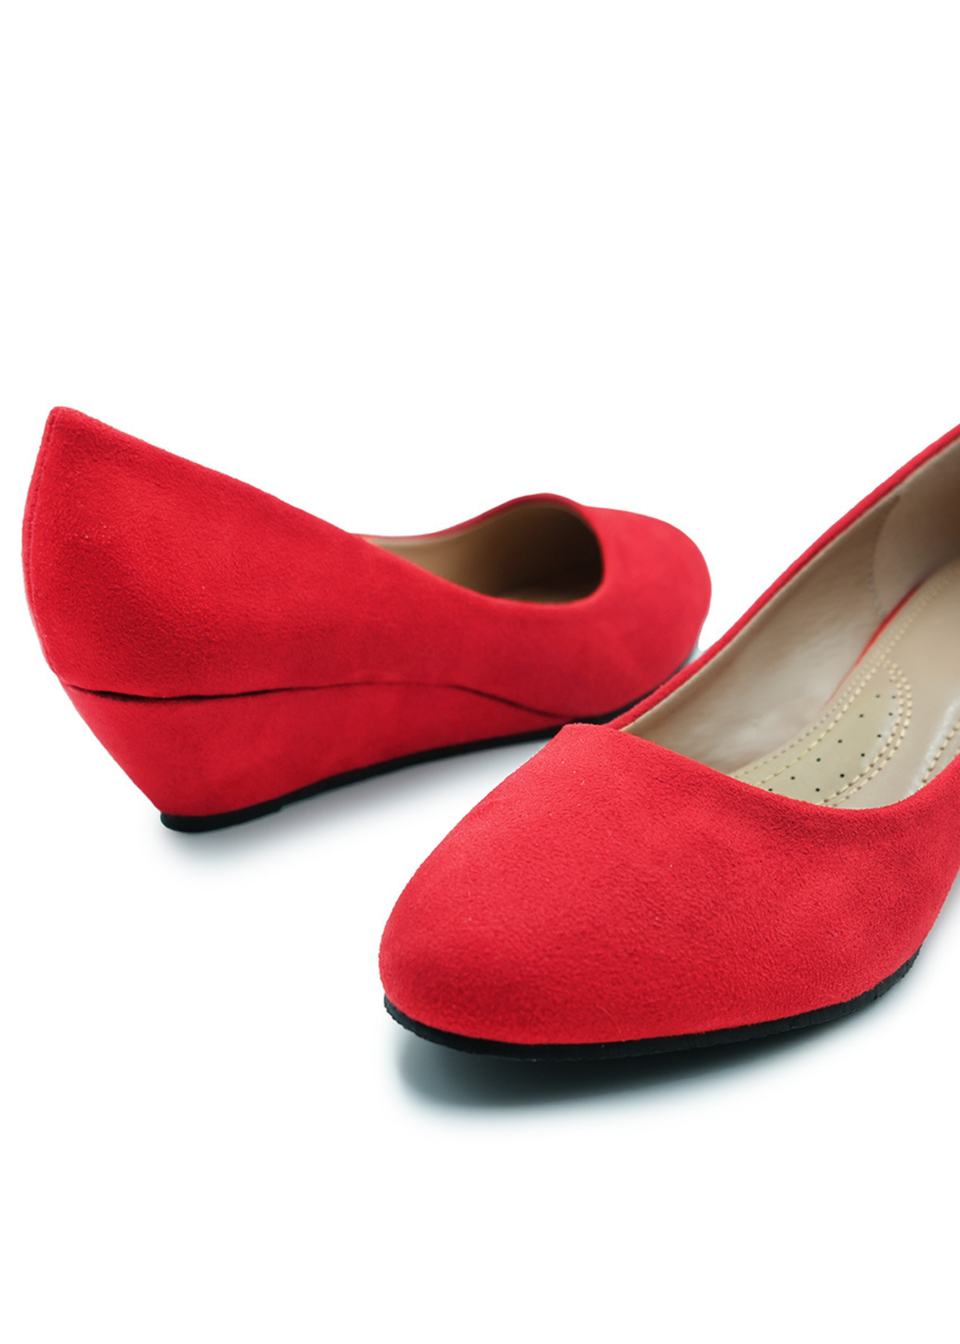 Where's That From Red Suede Kieran Platform Wedge Court Shoes